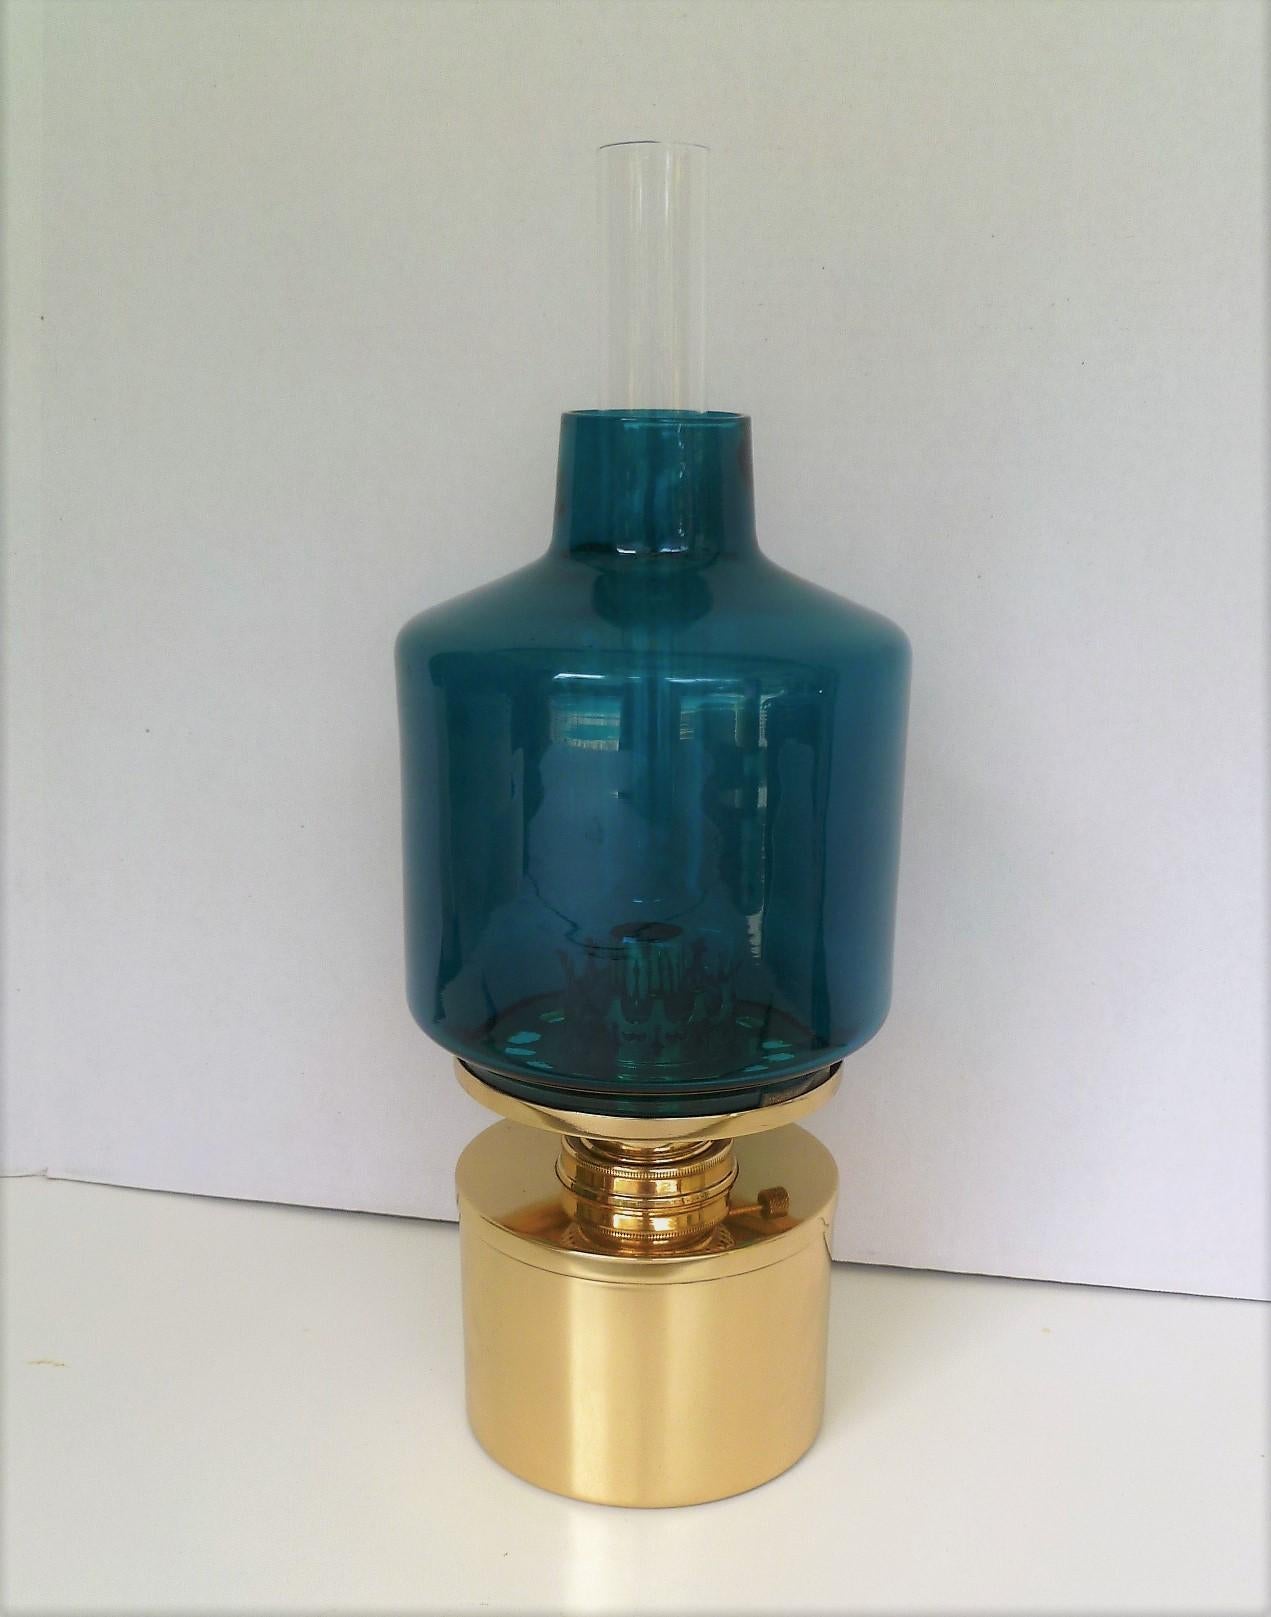 Kerosene oil lamp designed by Hans-Agne Jakobsson for AB Markaryd in the 1960s. This is the large L-47 model with the brilliant blue outer shade and clear inner chimney. The brass has been professionally polished. The lamp does not come with a wick;